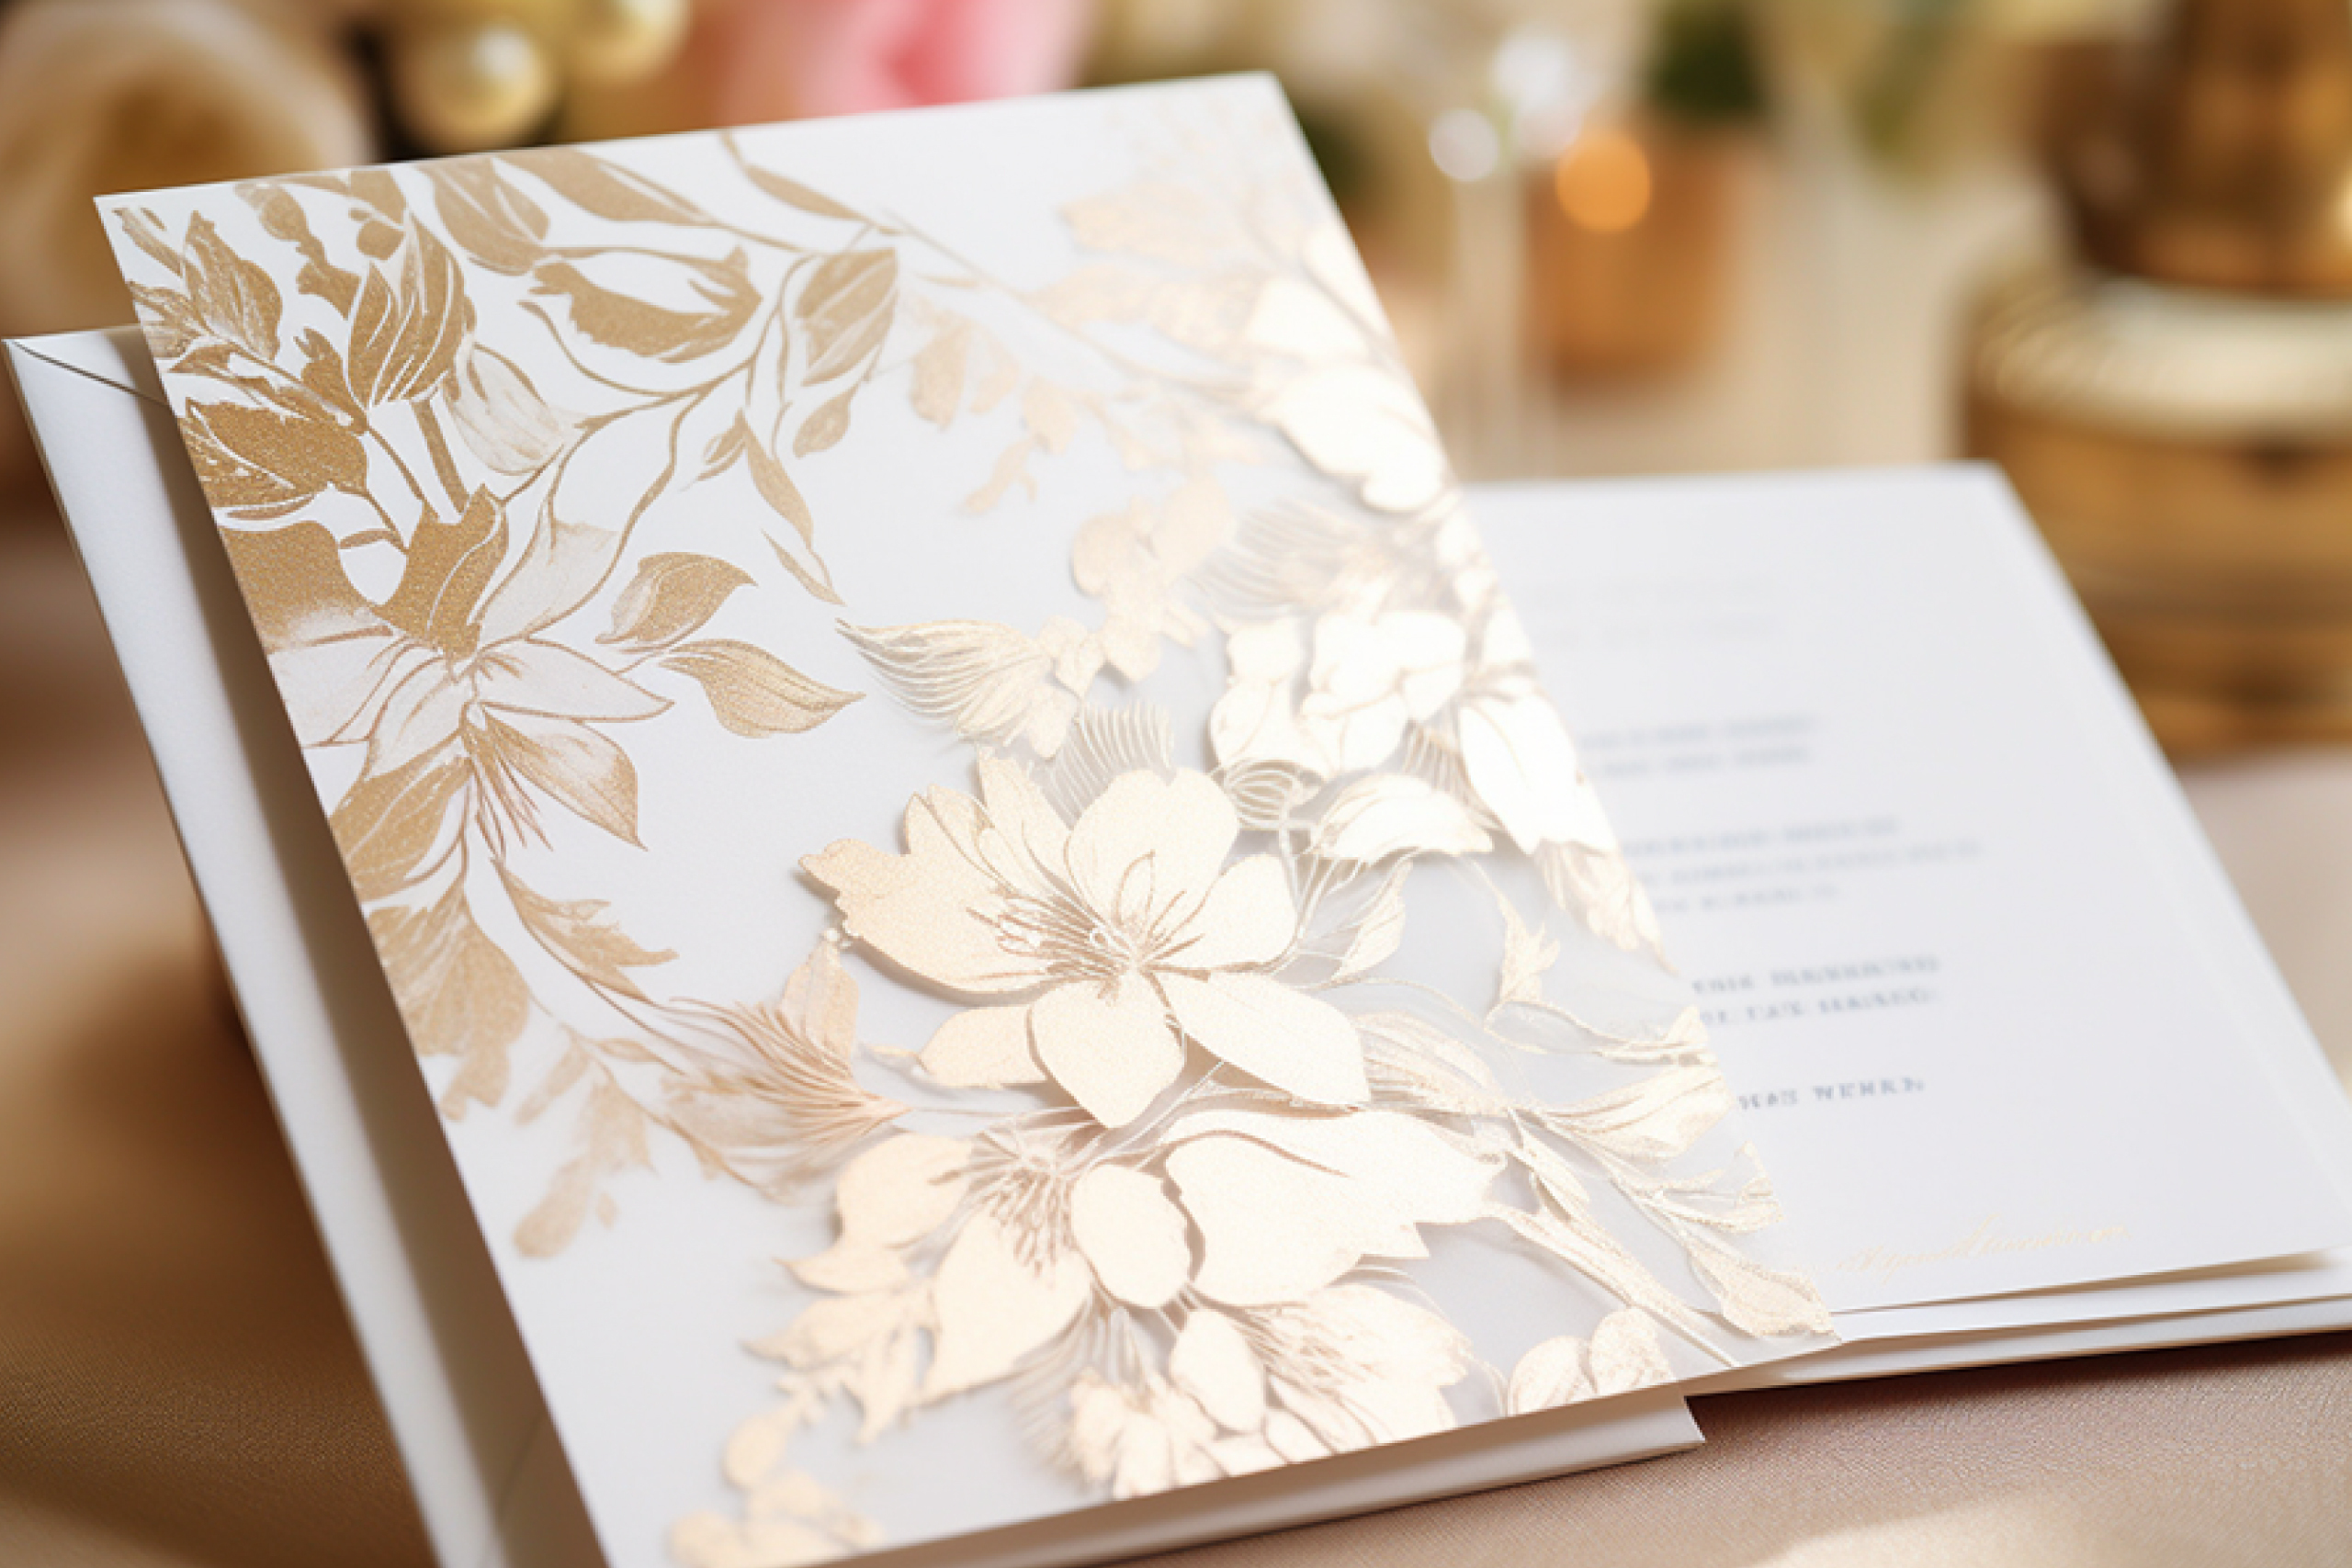 The Etiquette of Invitations: When and How to Send Them